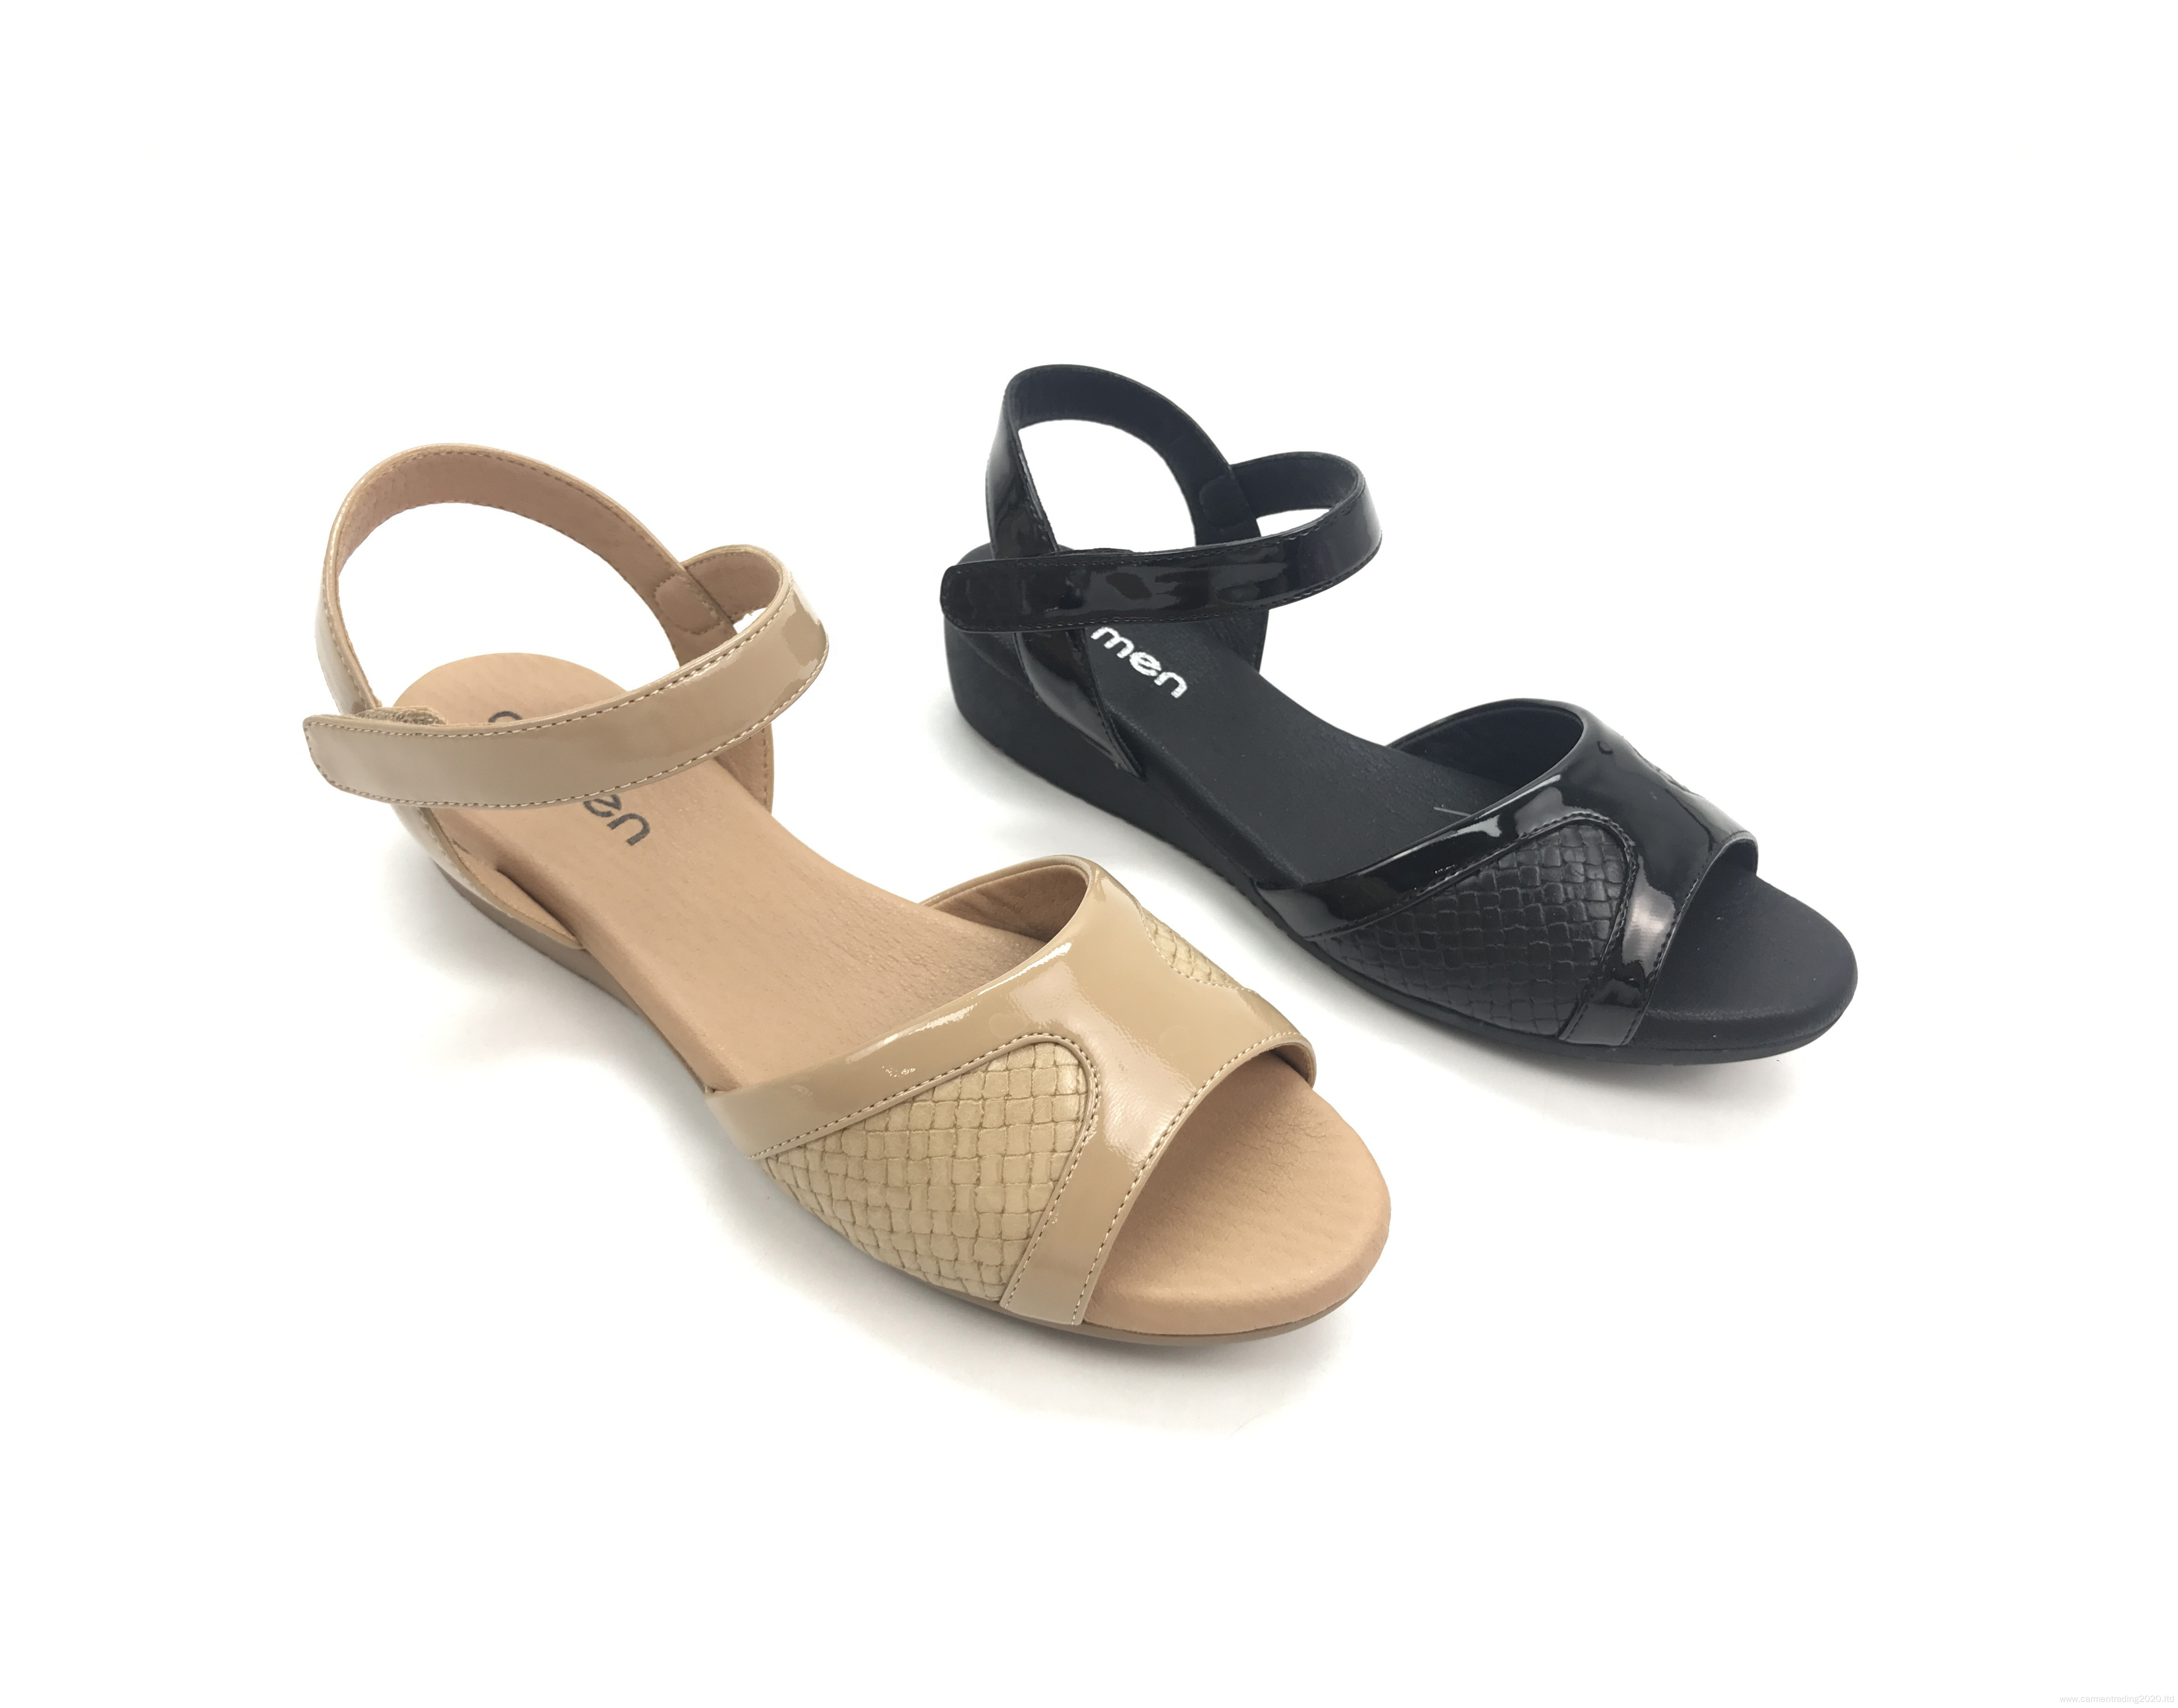 Ladies daily sandals Low wedge sandals women